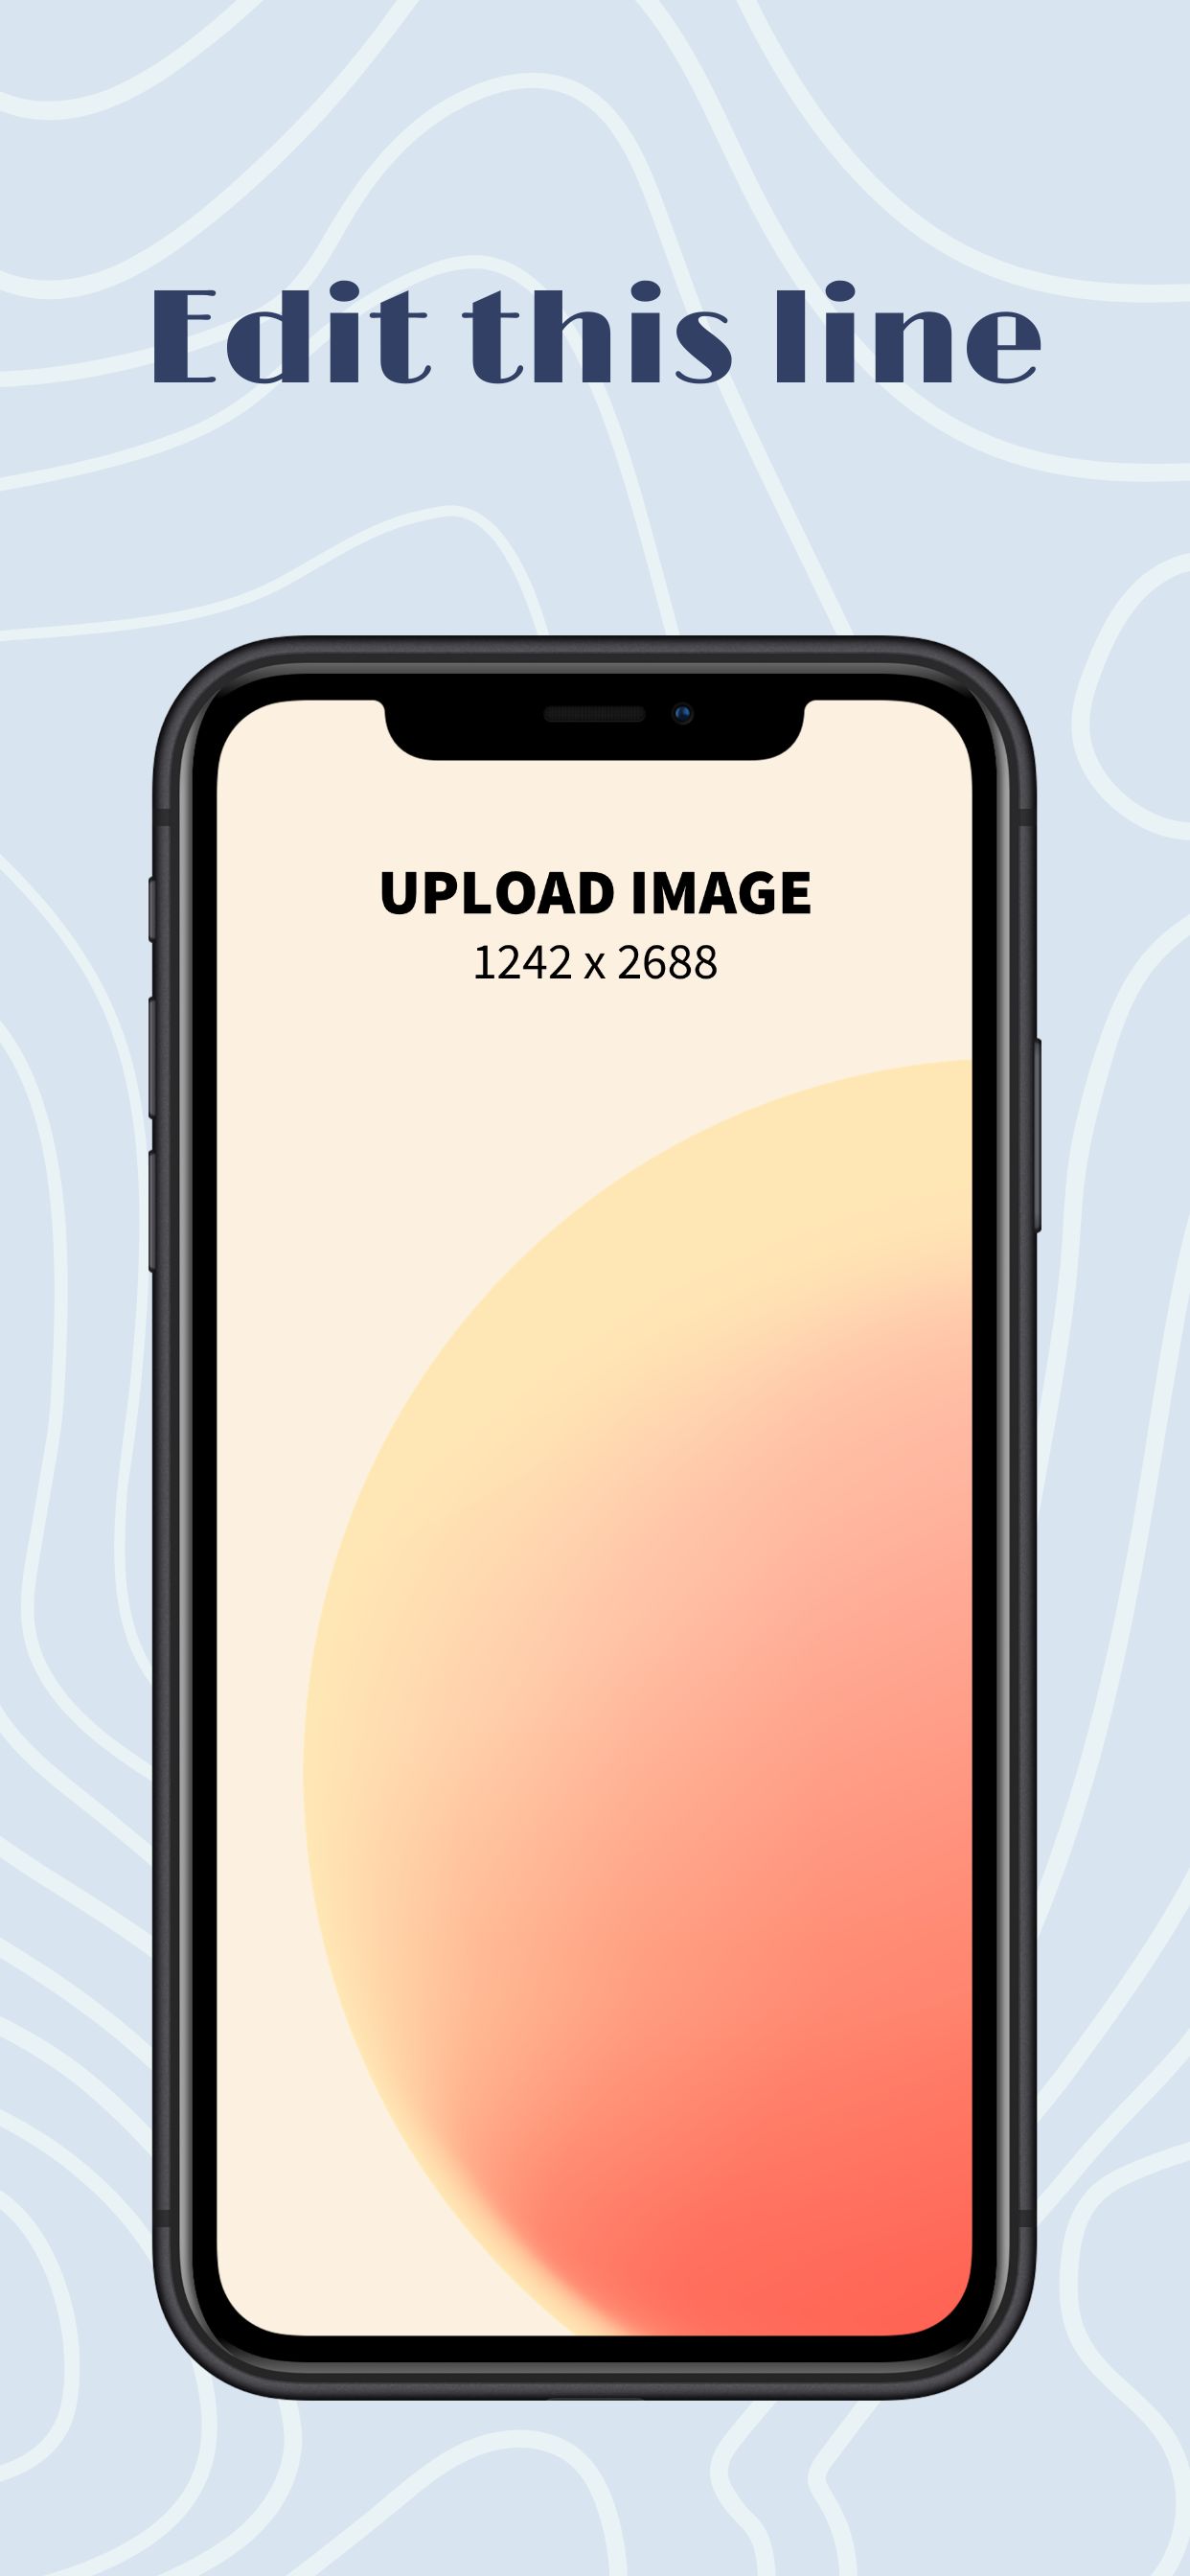 iPhone XS Max Screenshot 7 template. Quickly edit text, colors, images, and more for free.